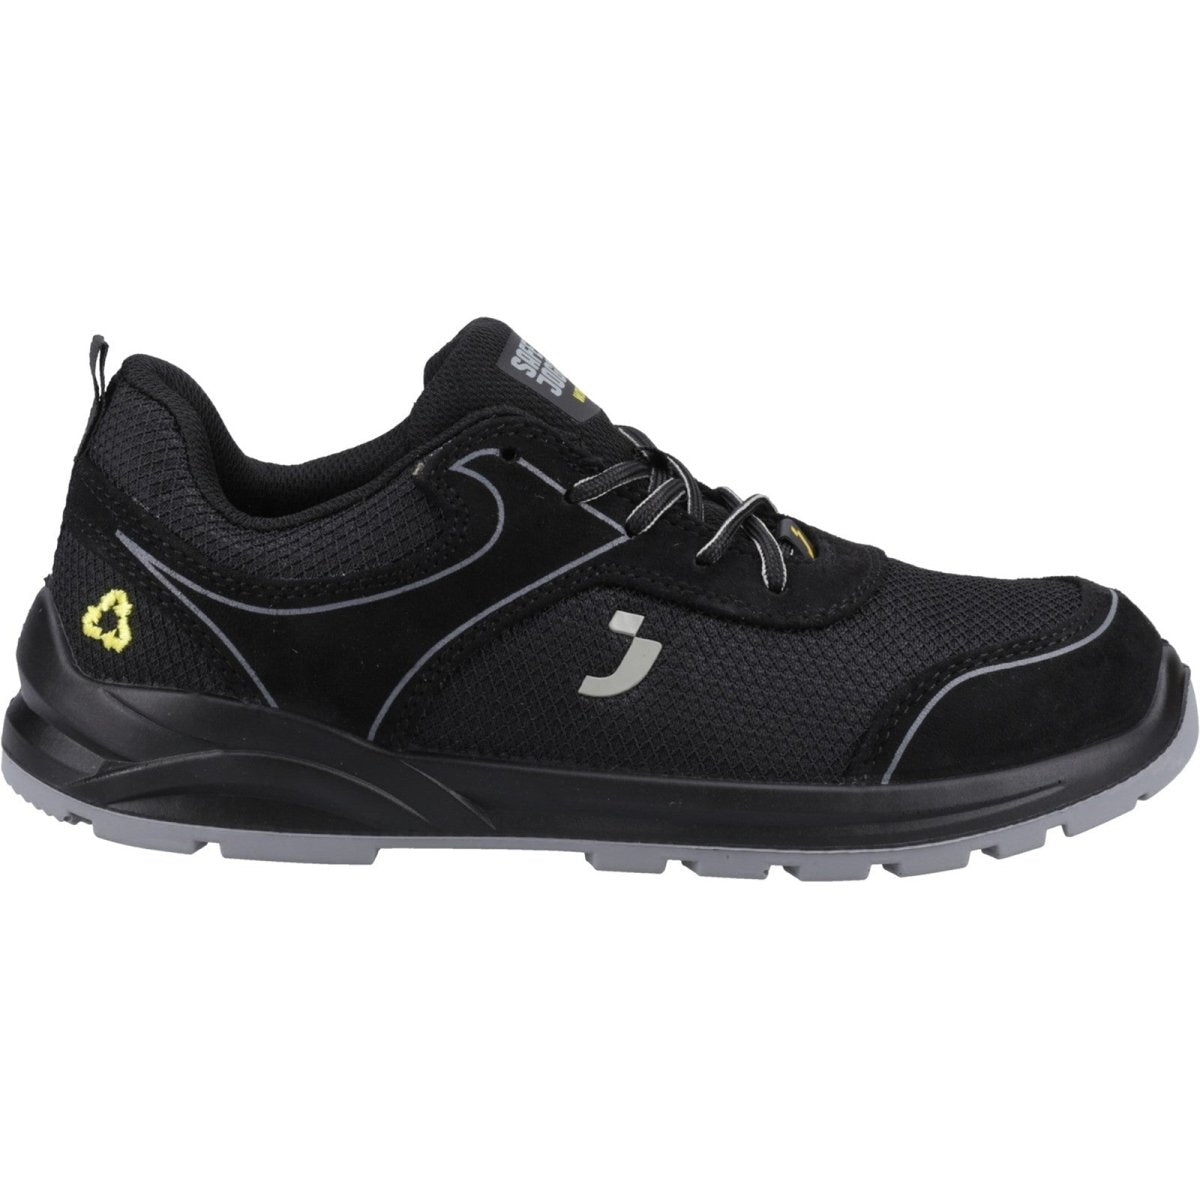 Safety Jogger Eco Cador Safety Shoe - Shoe Store Direct